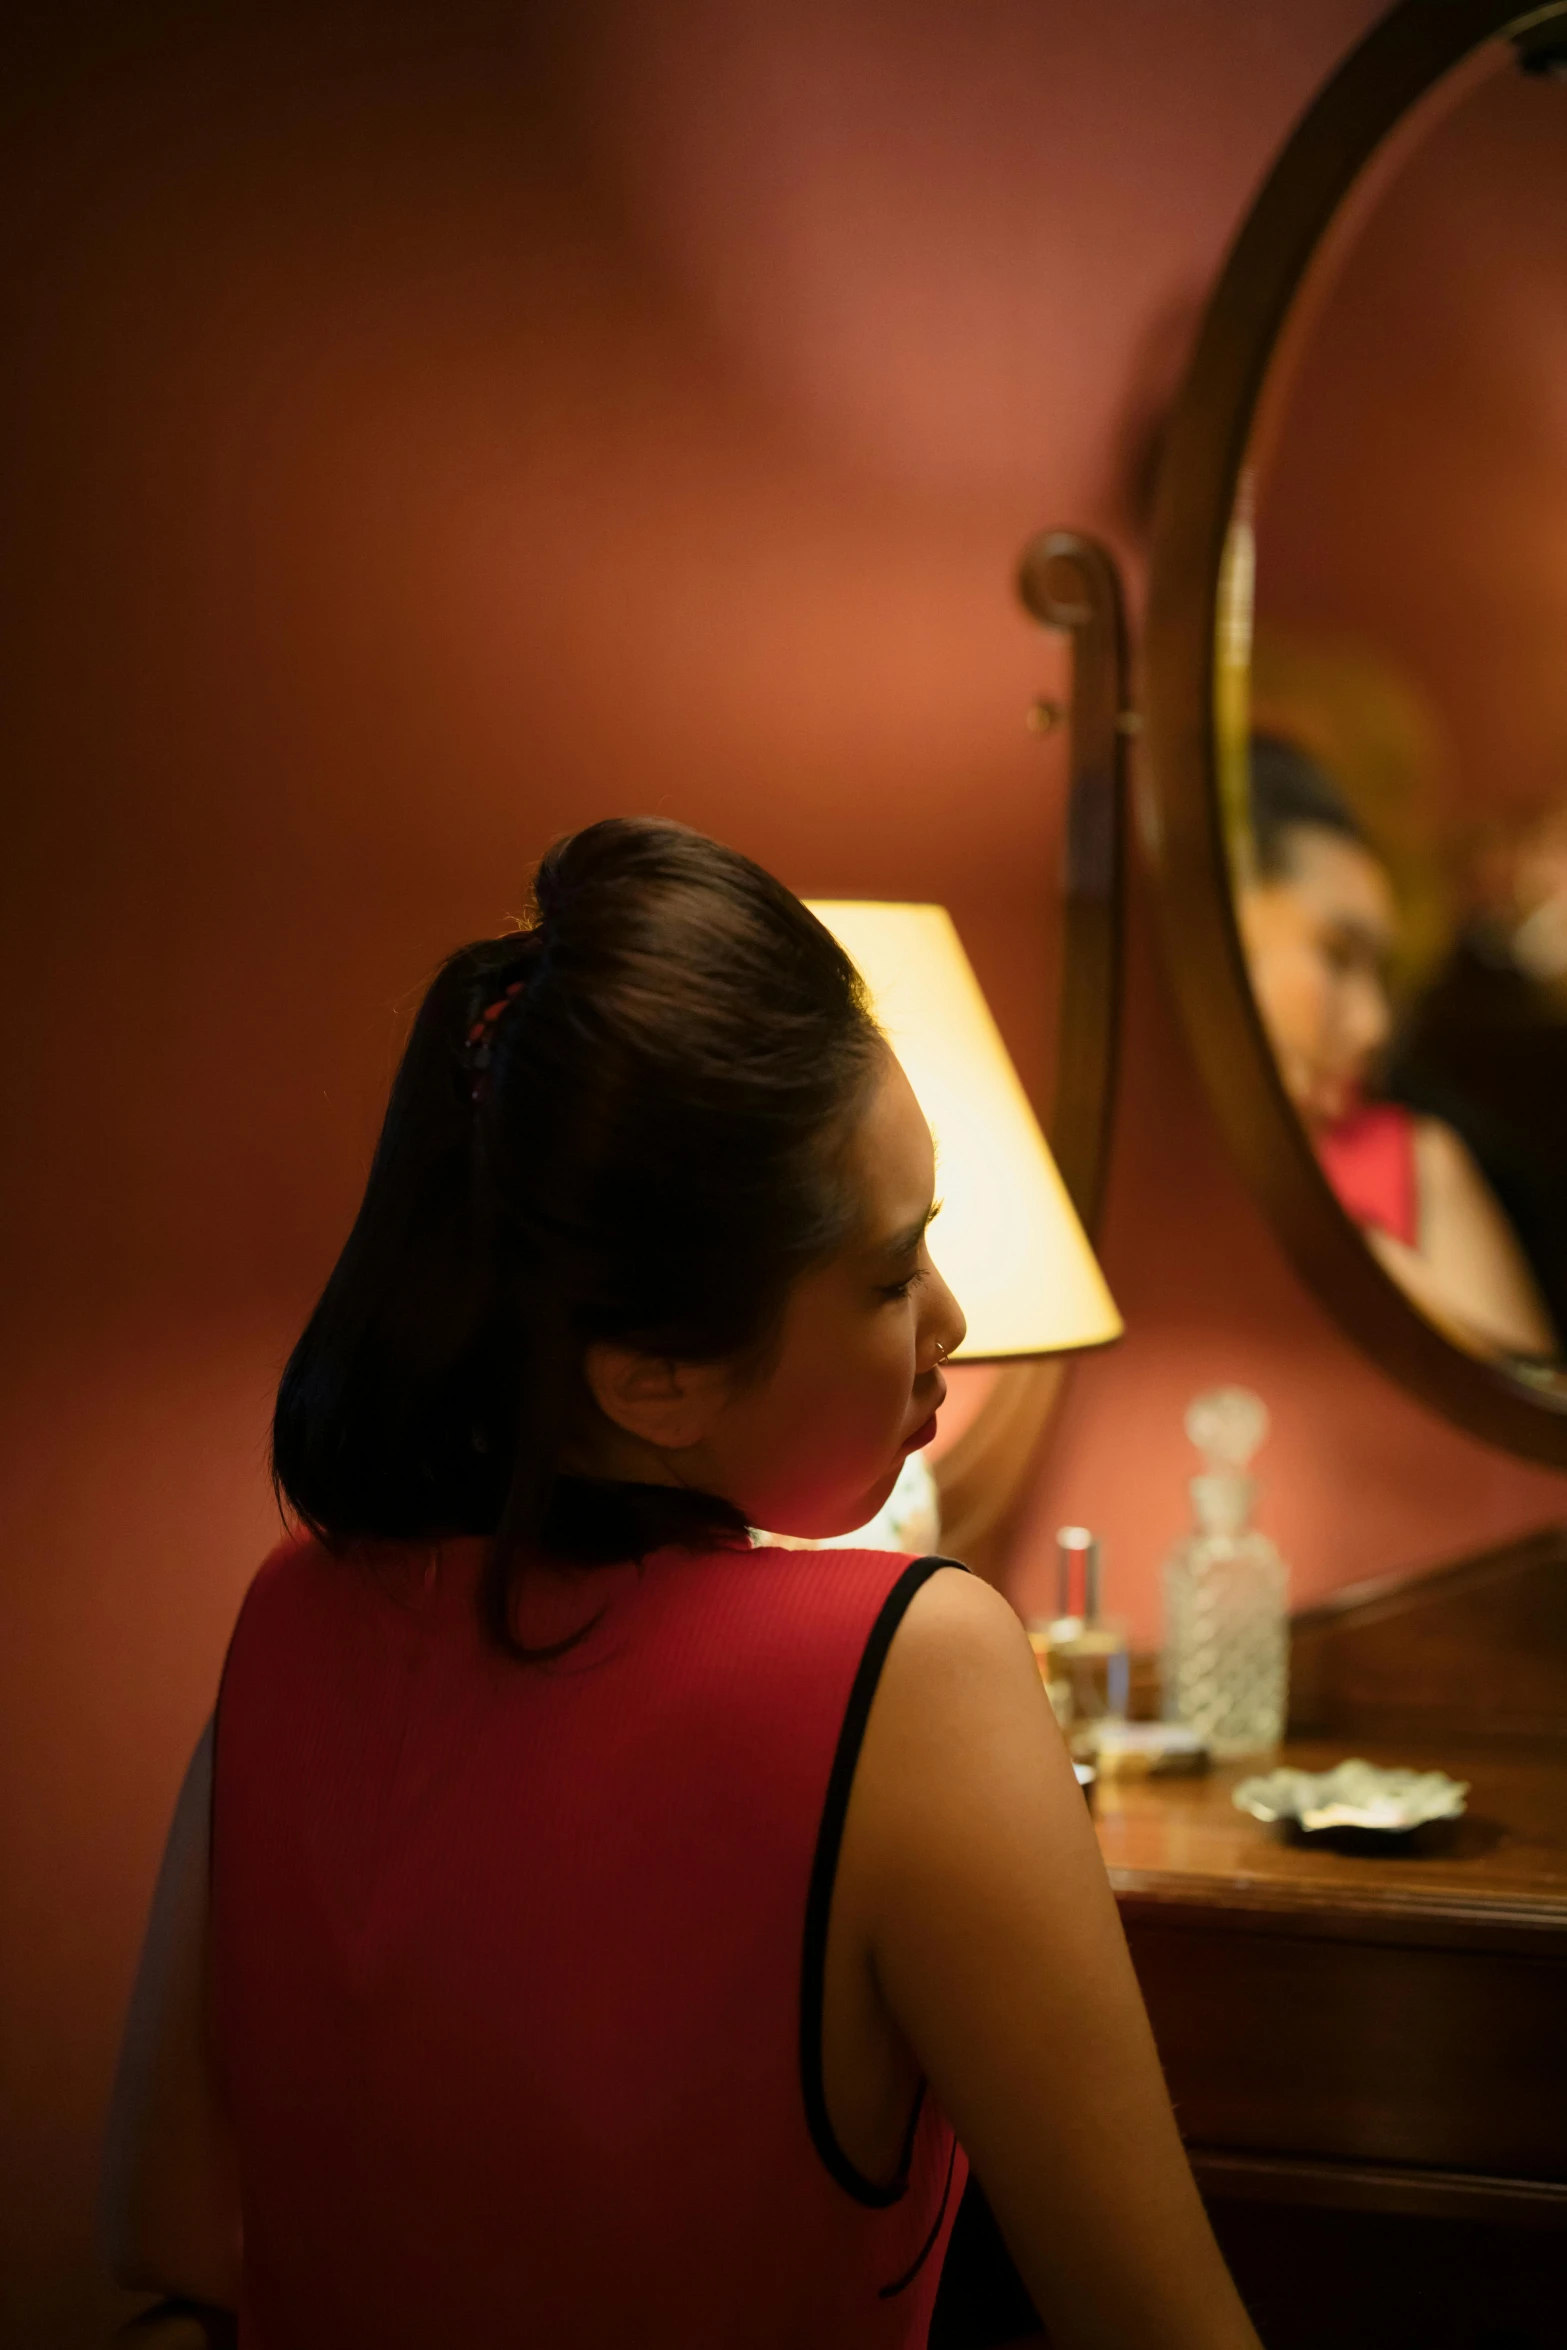 a woman looking at her reflection in a mirror, a portrait, inspired by Nan Goldin, happening, cheongsam, red room, soft lighting |, woman's profile